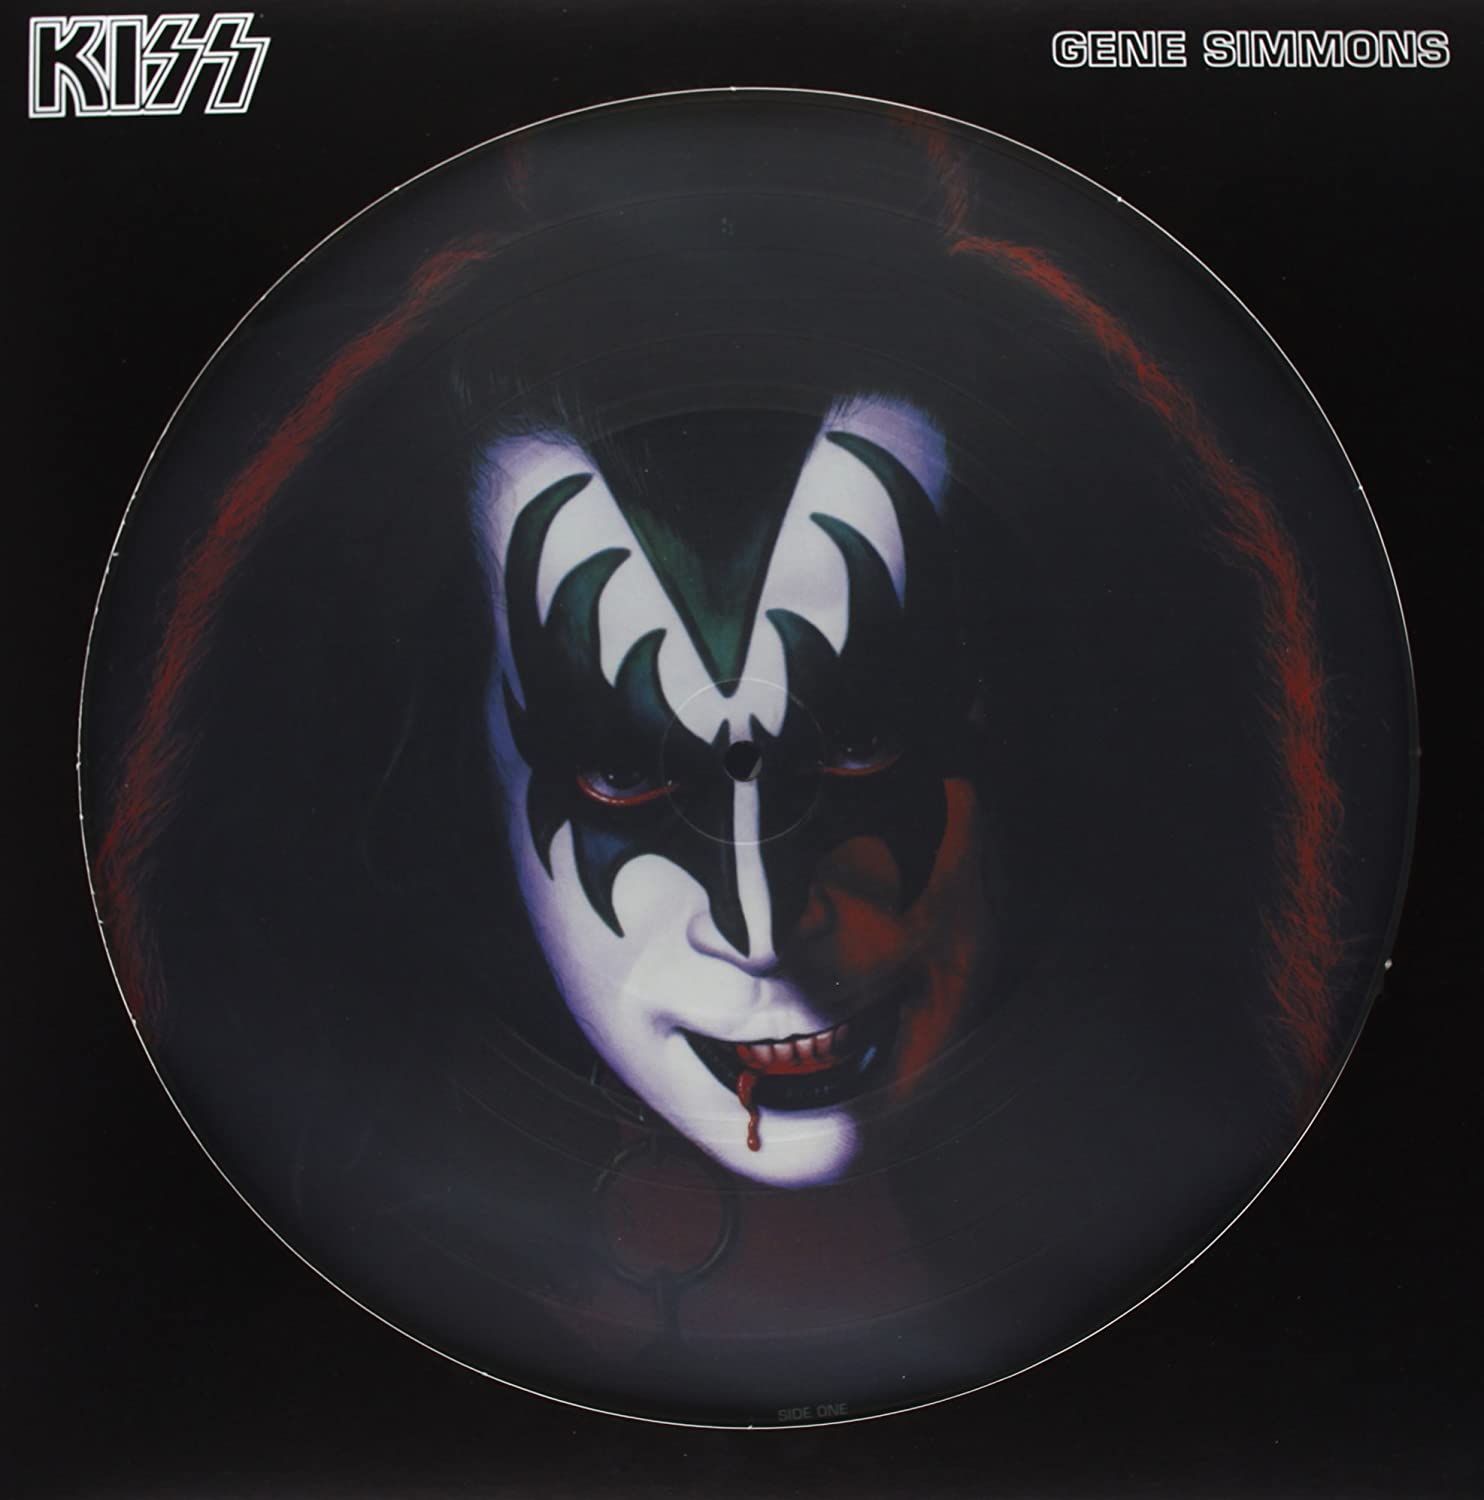 Kiss - Gene Simmonds (Picture Disc)